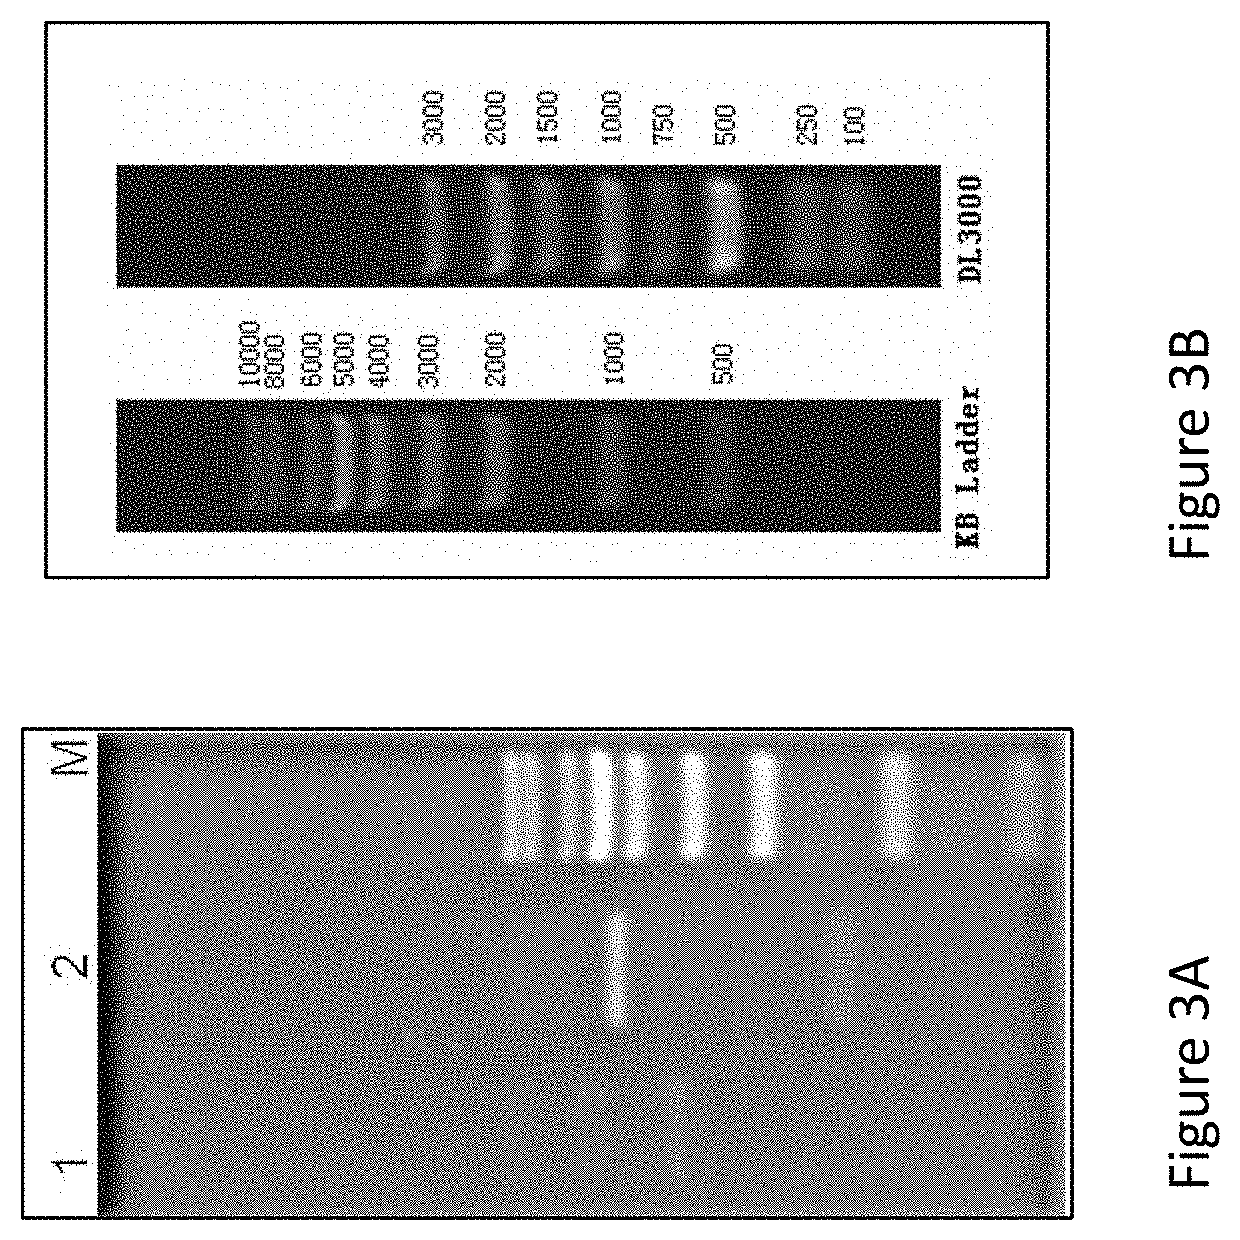 Cra4s1 gene, encoded cra4s1 protein, and application